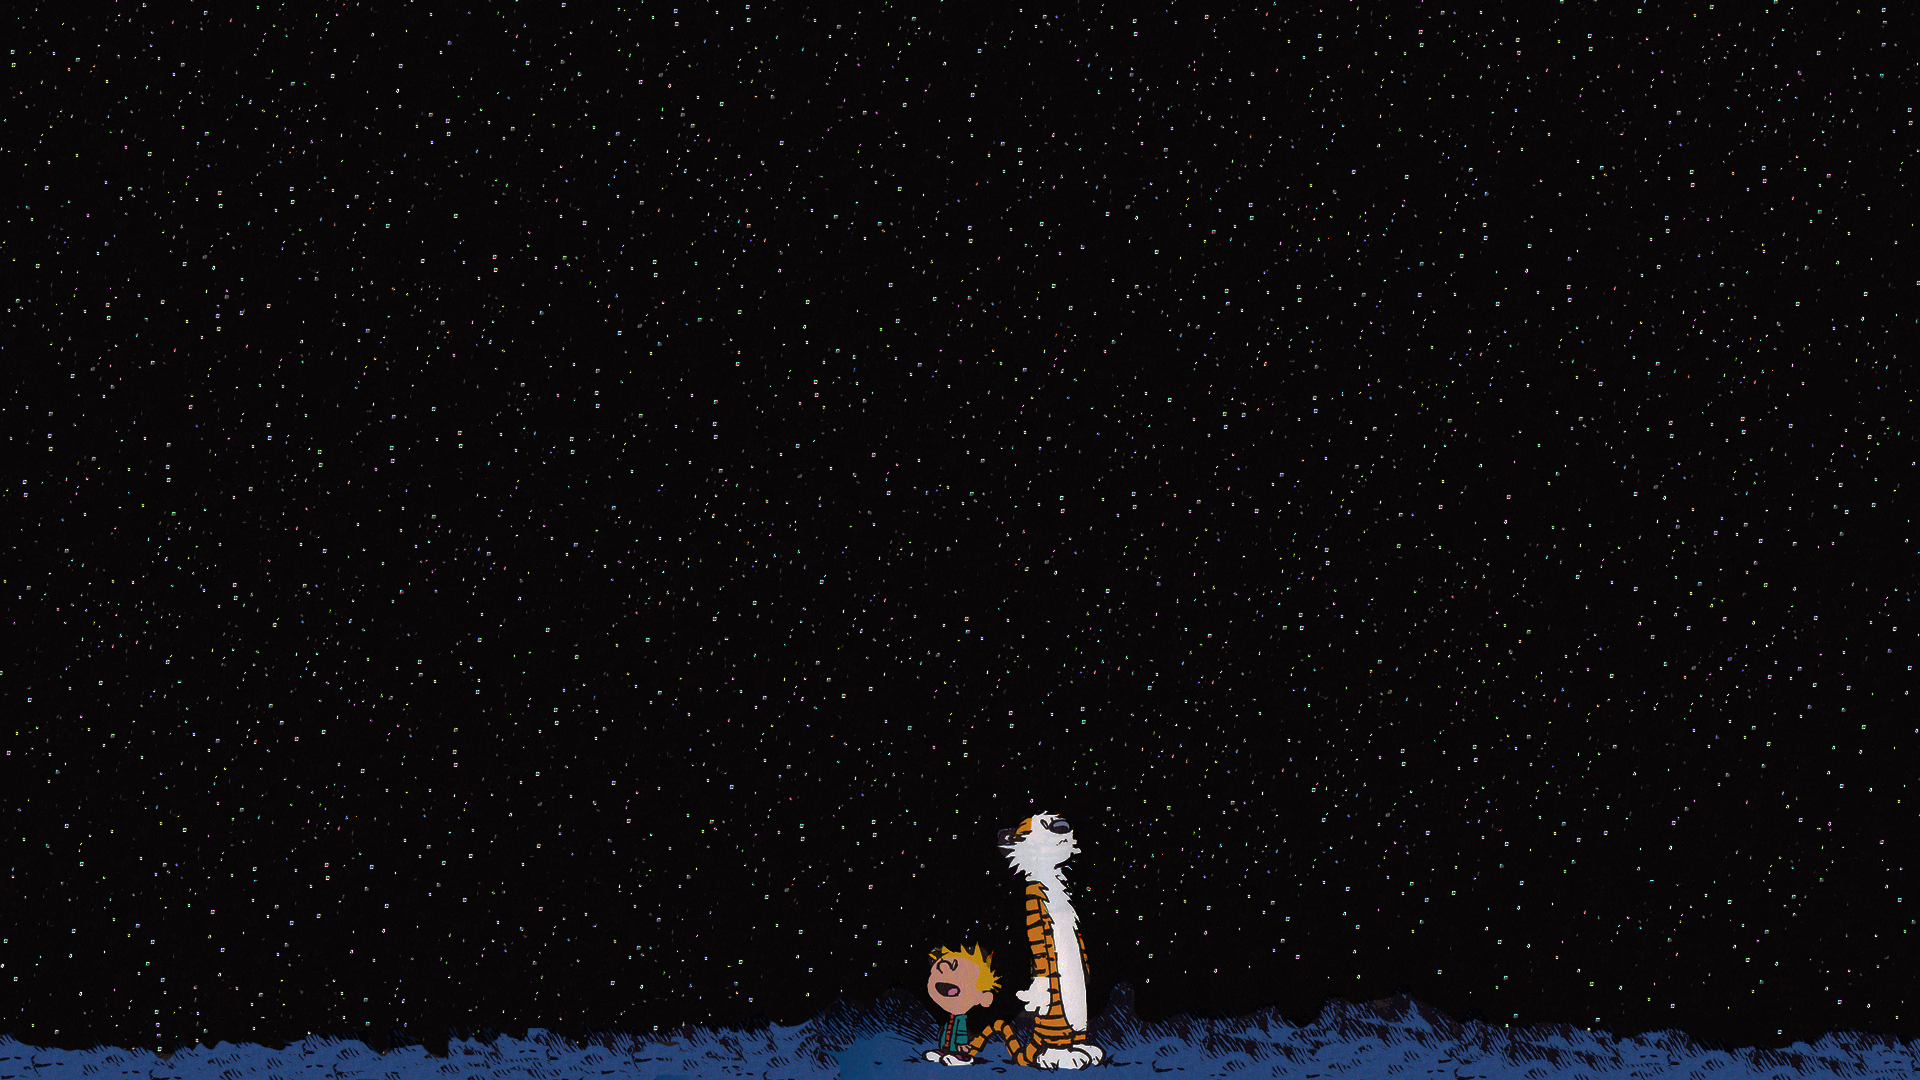 Stars Calvin And Hobbes Wallpaper Image Pictures